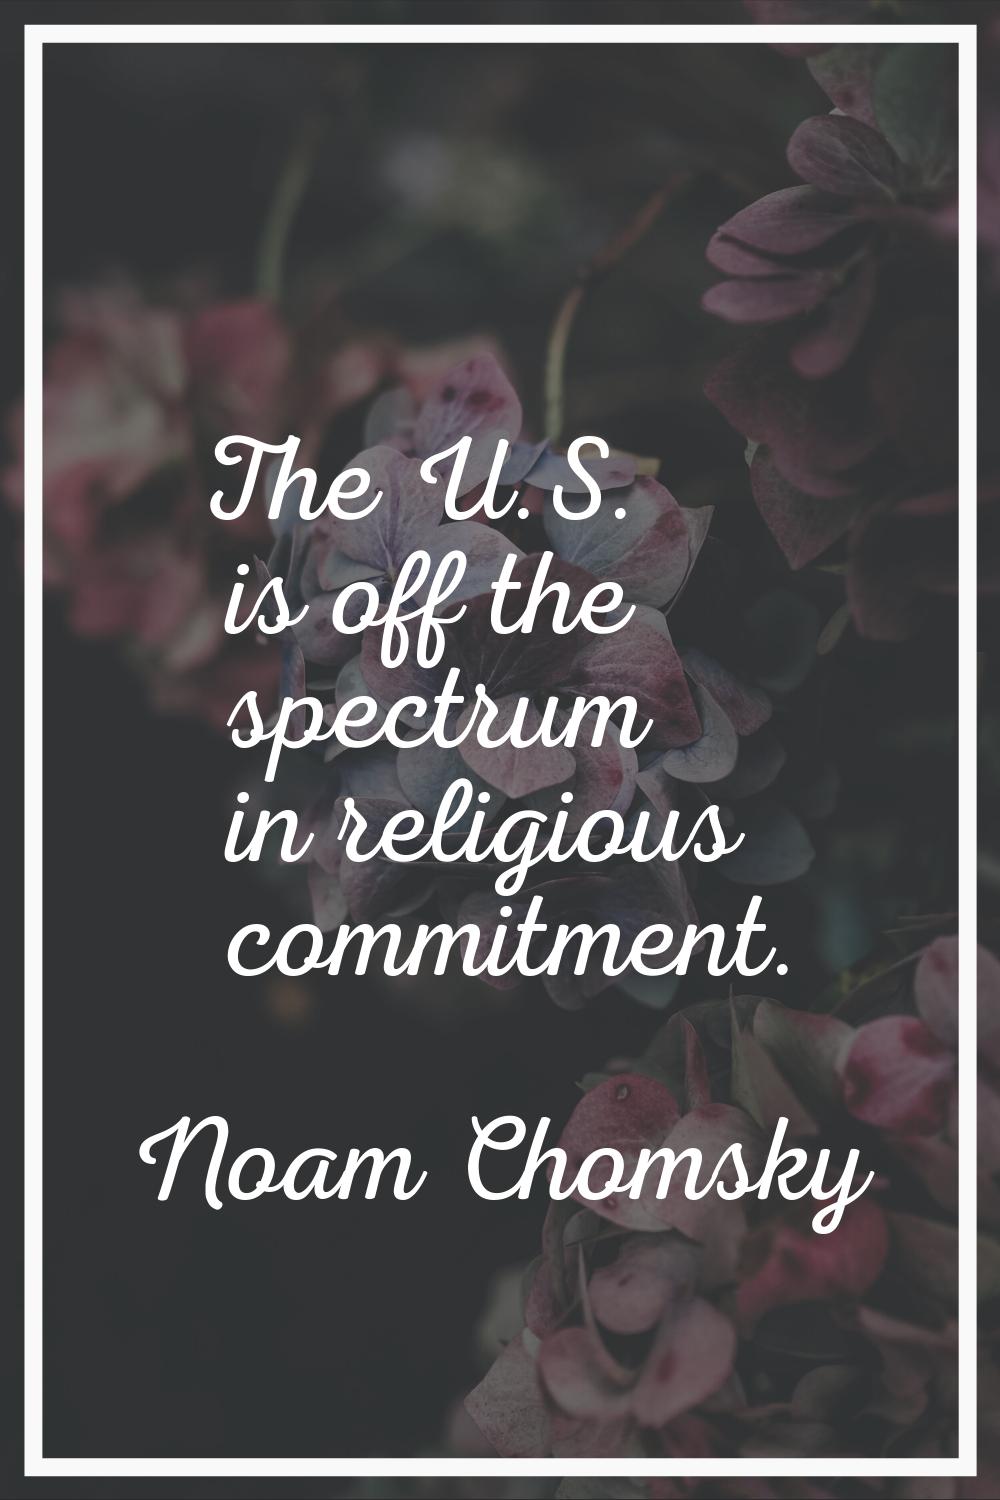 The U.S. is off the spectrum in religious commitment.